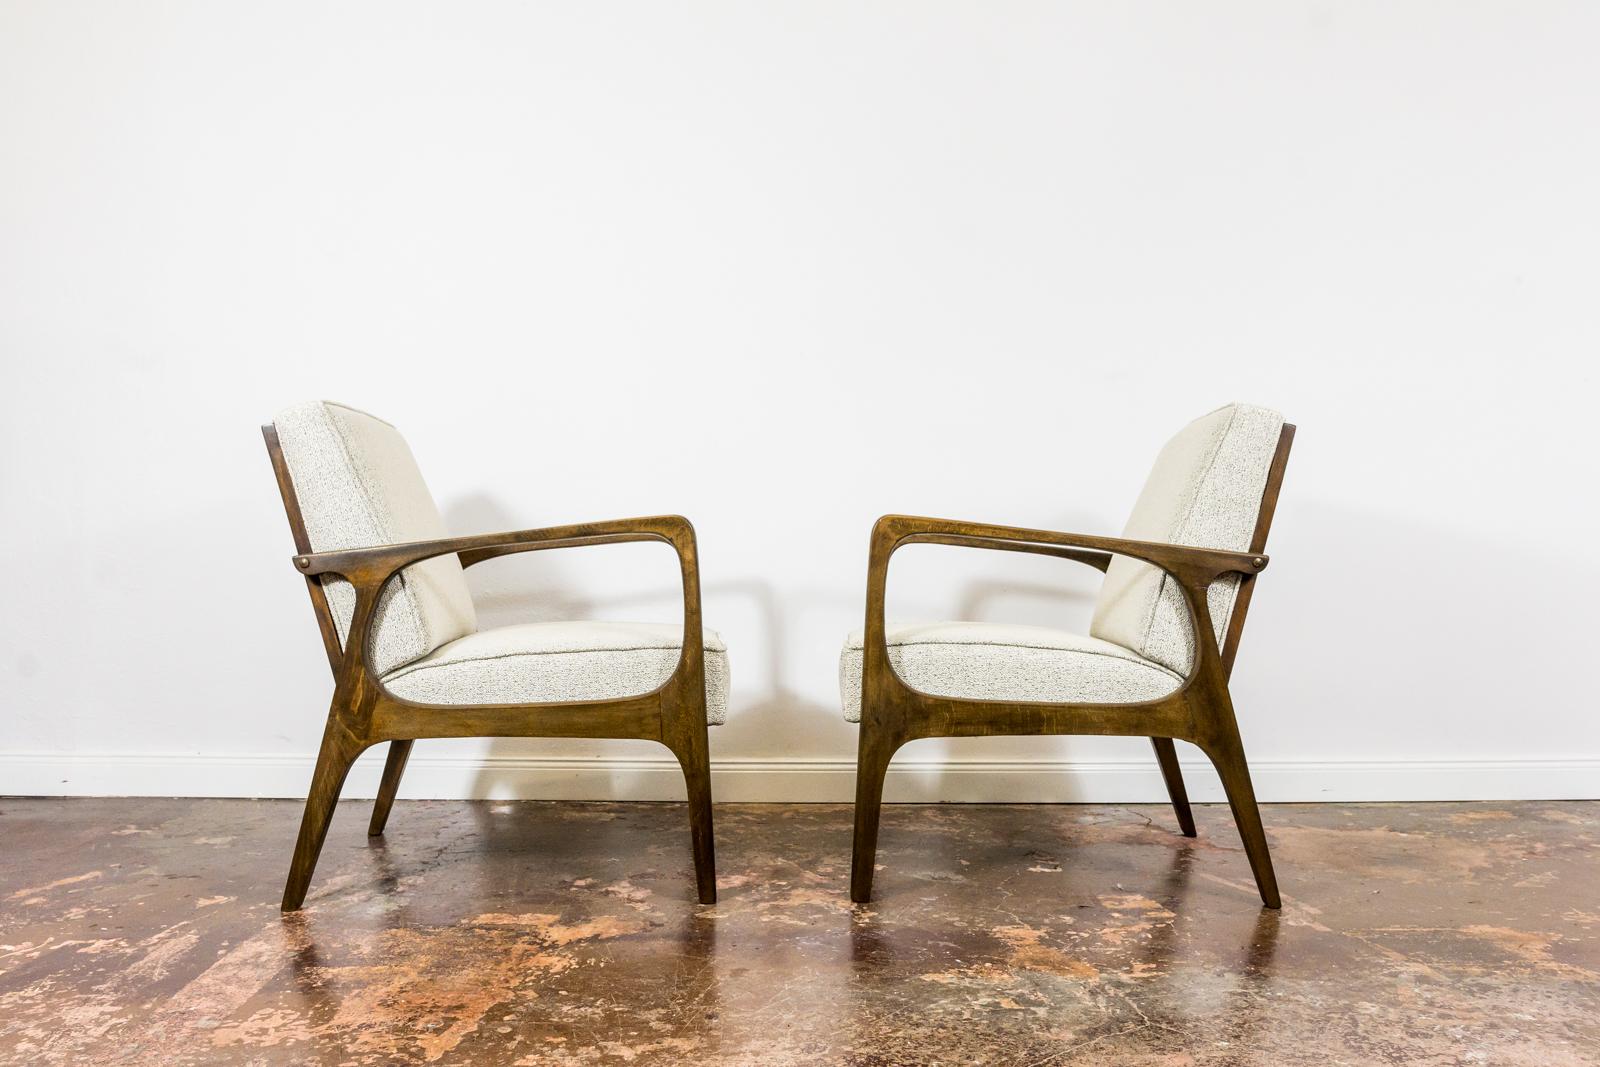 Pair of Mid-Century Armchairs from Prudnickie Fabryki Mebli 1960's, Poland In Good Condition For Sale In Wroclaw, PL